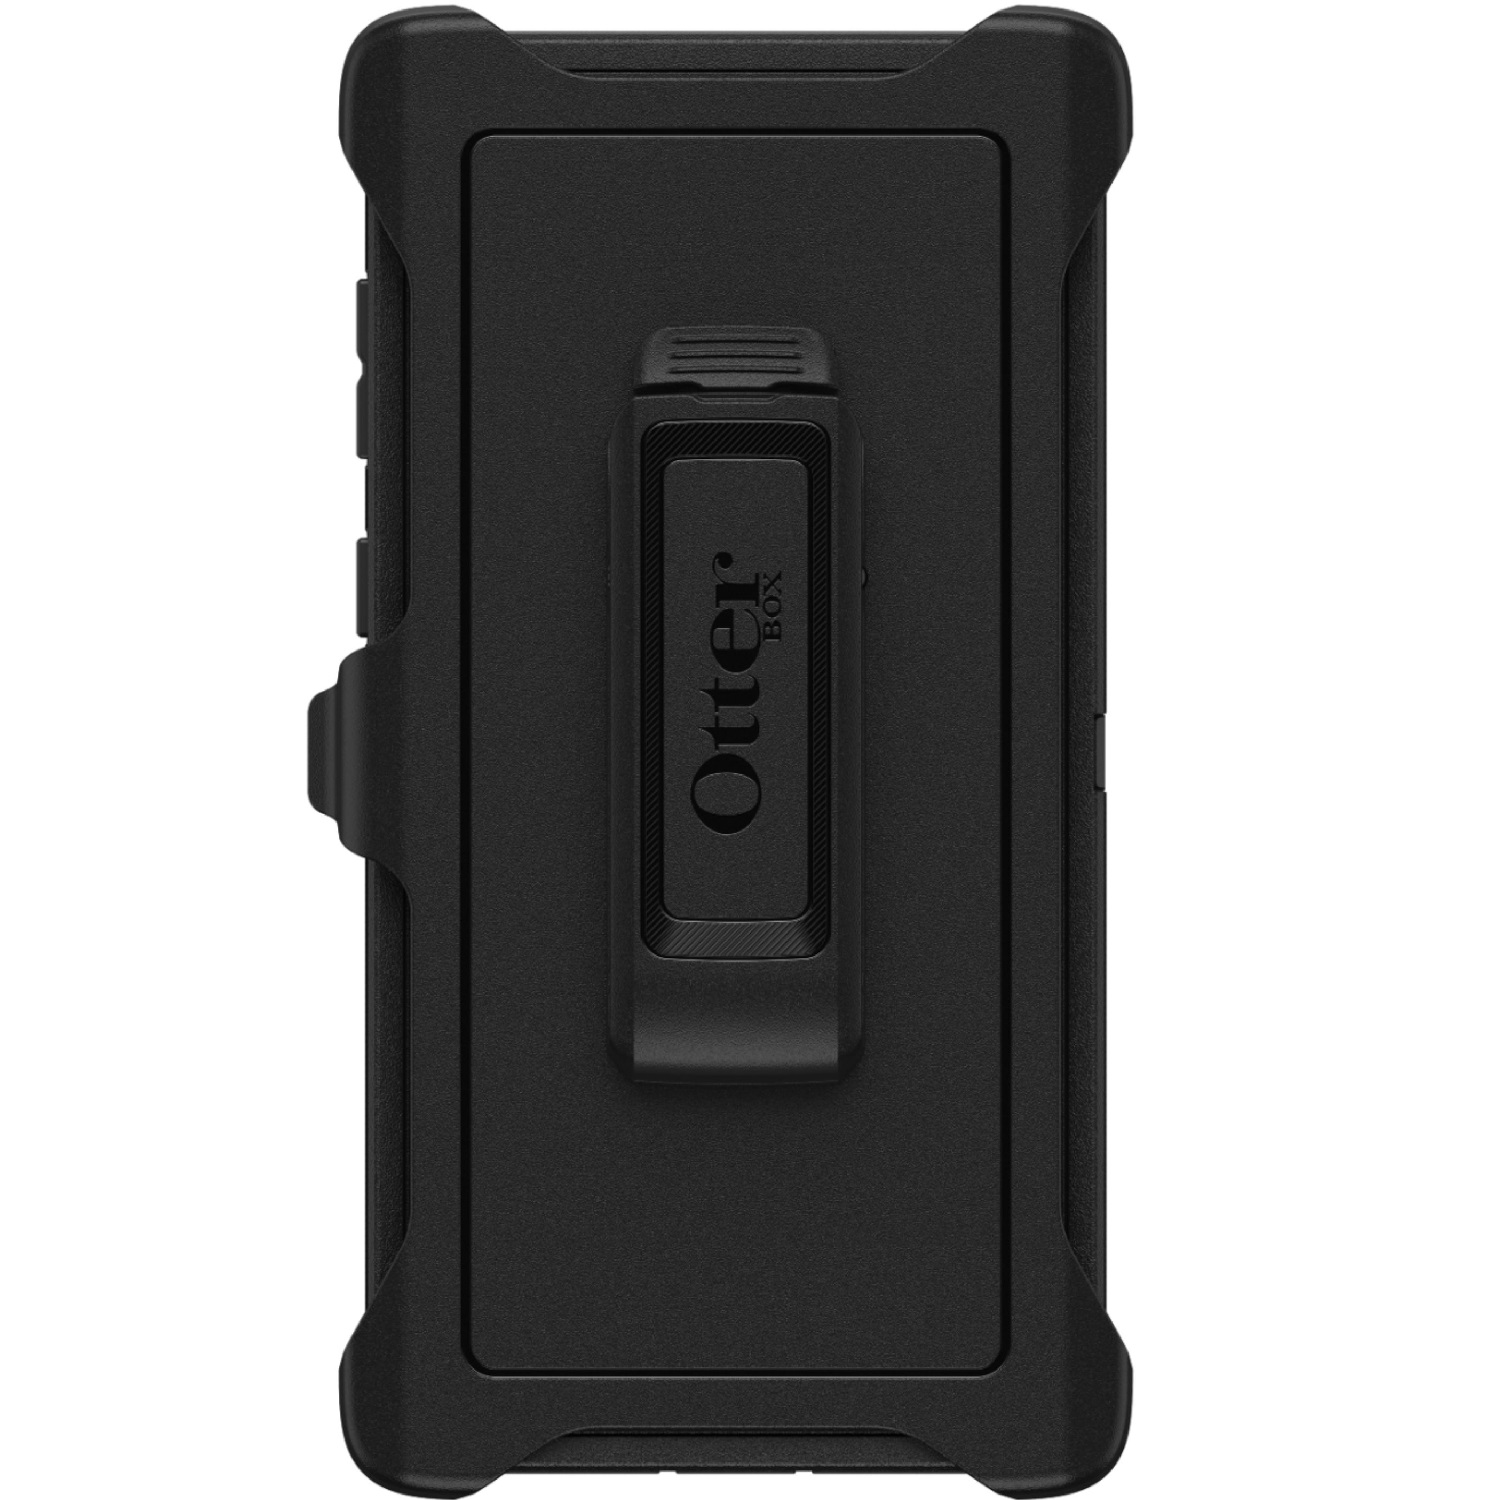 OtterBox Defender Carrying Case (Holster) Samsung Galaxy Note10, Galaxy Note10 5G Smartphone, Black - image 2 of 2